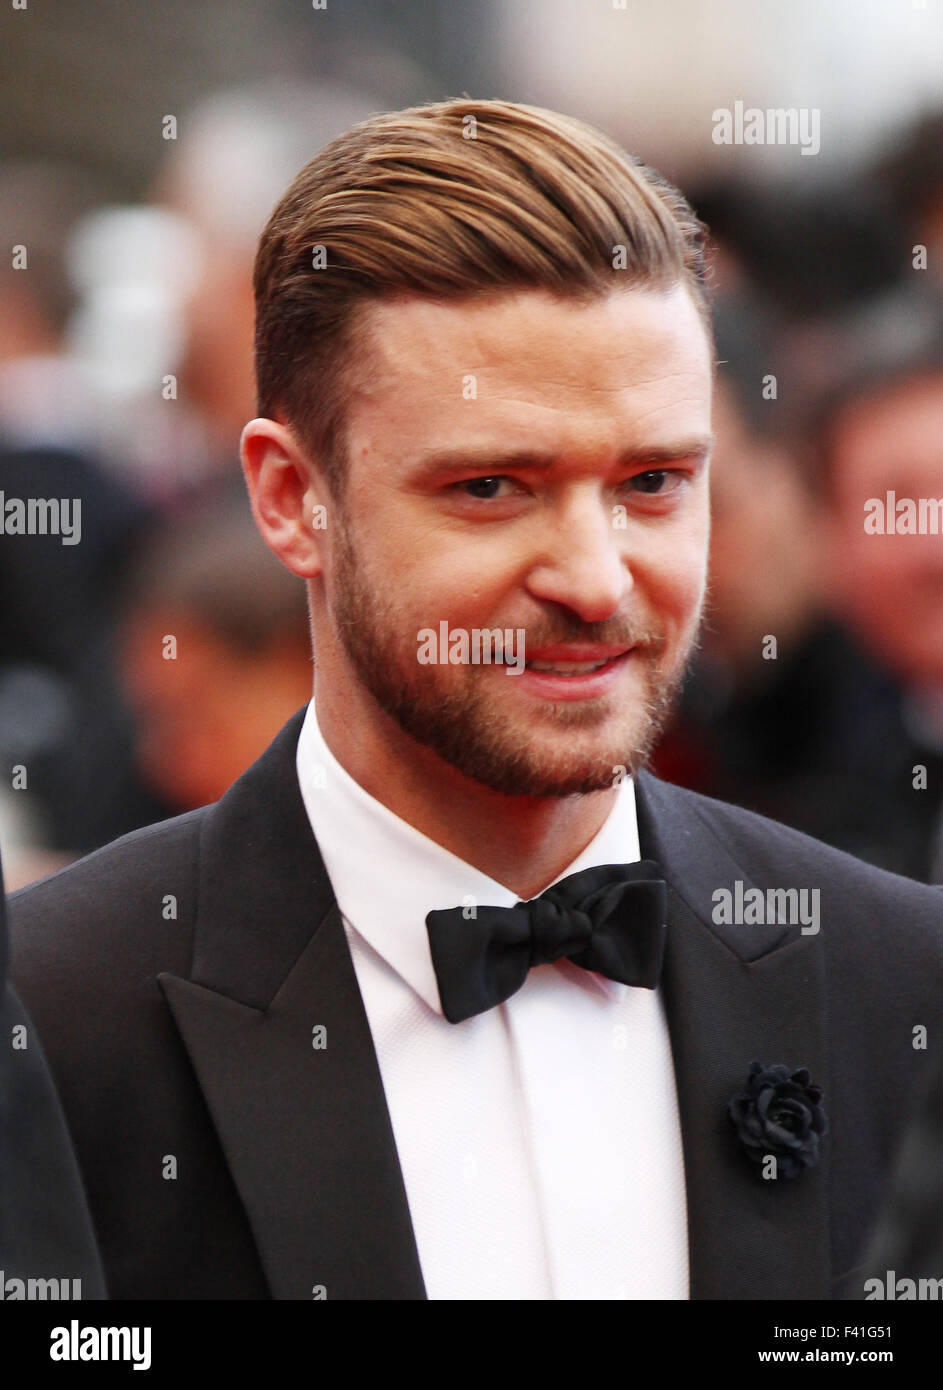 Justin Timberlake seen at the Cannes film festival in France, 2013 Stock Photo